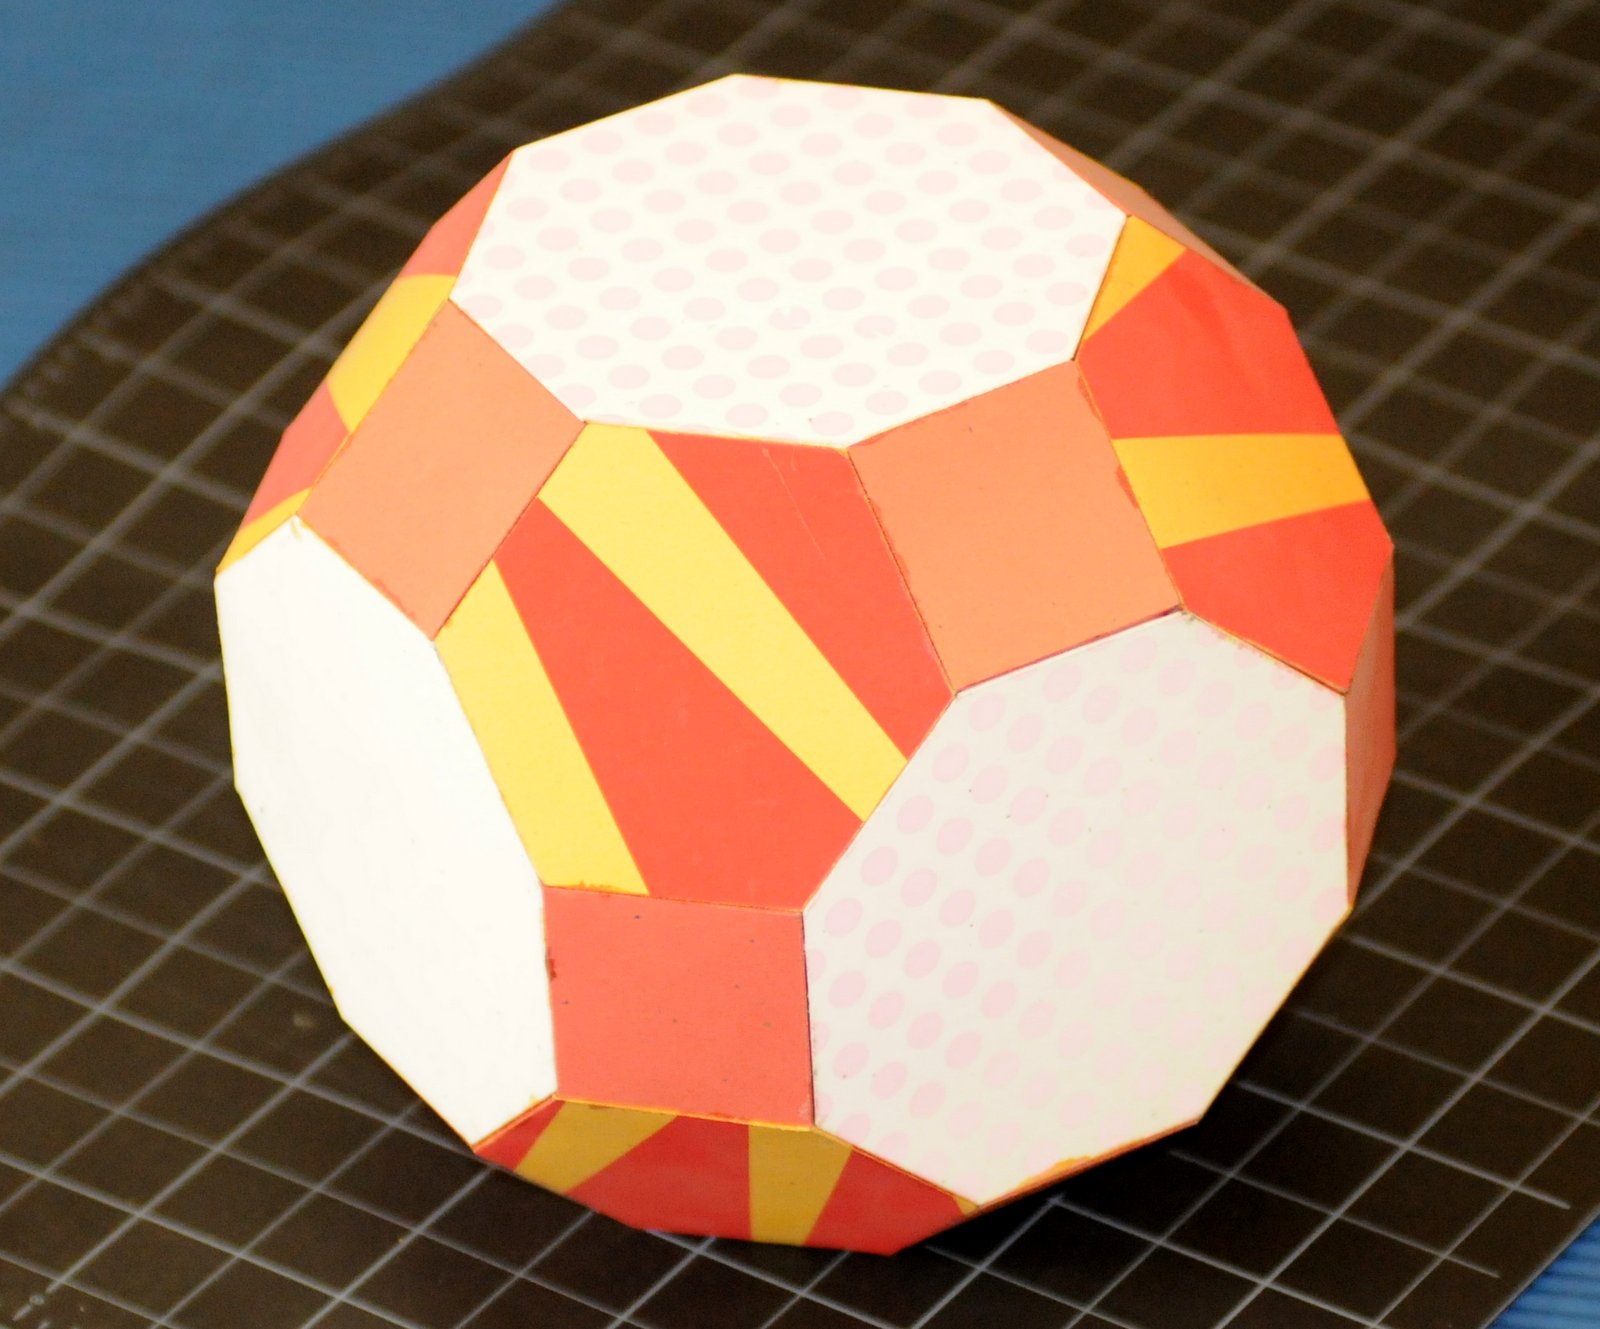 Paper model of the "Rhombitruncated Cuboctahedron" polyhedra, featuring 6 octahedron faces, 8 hexagon faces, and 12 square faces